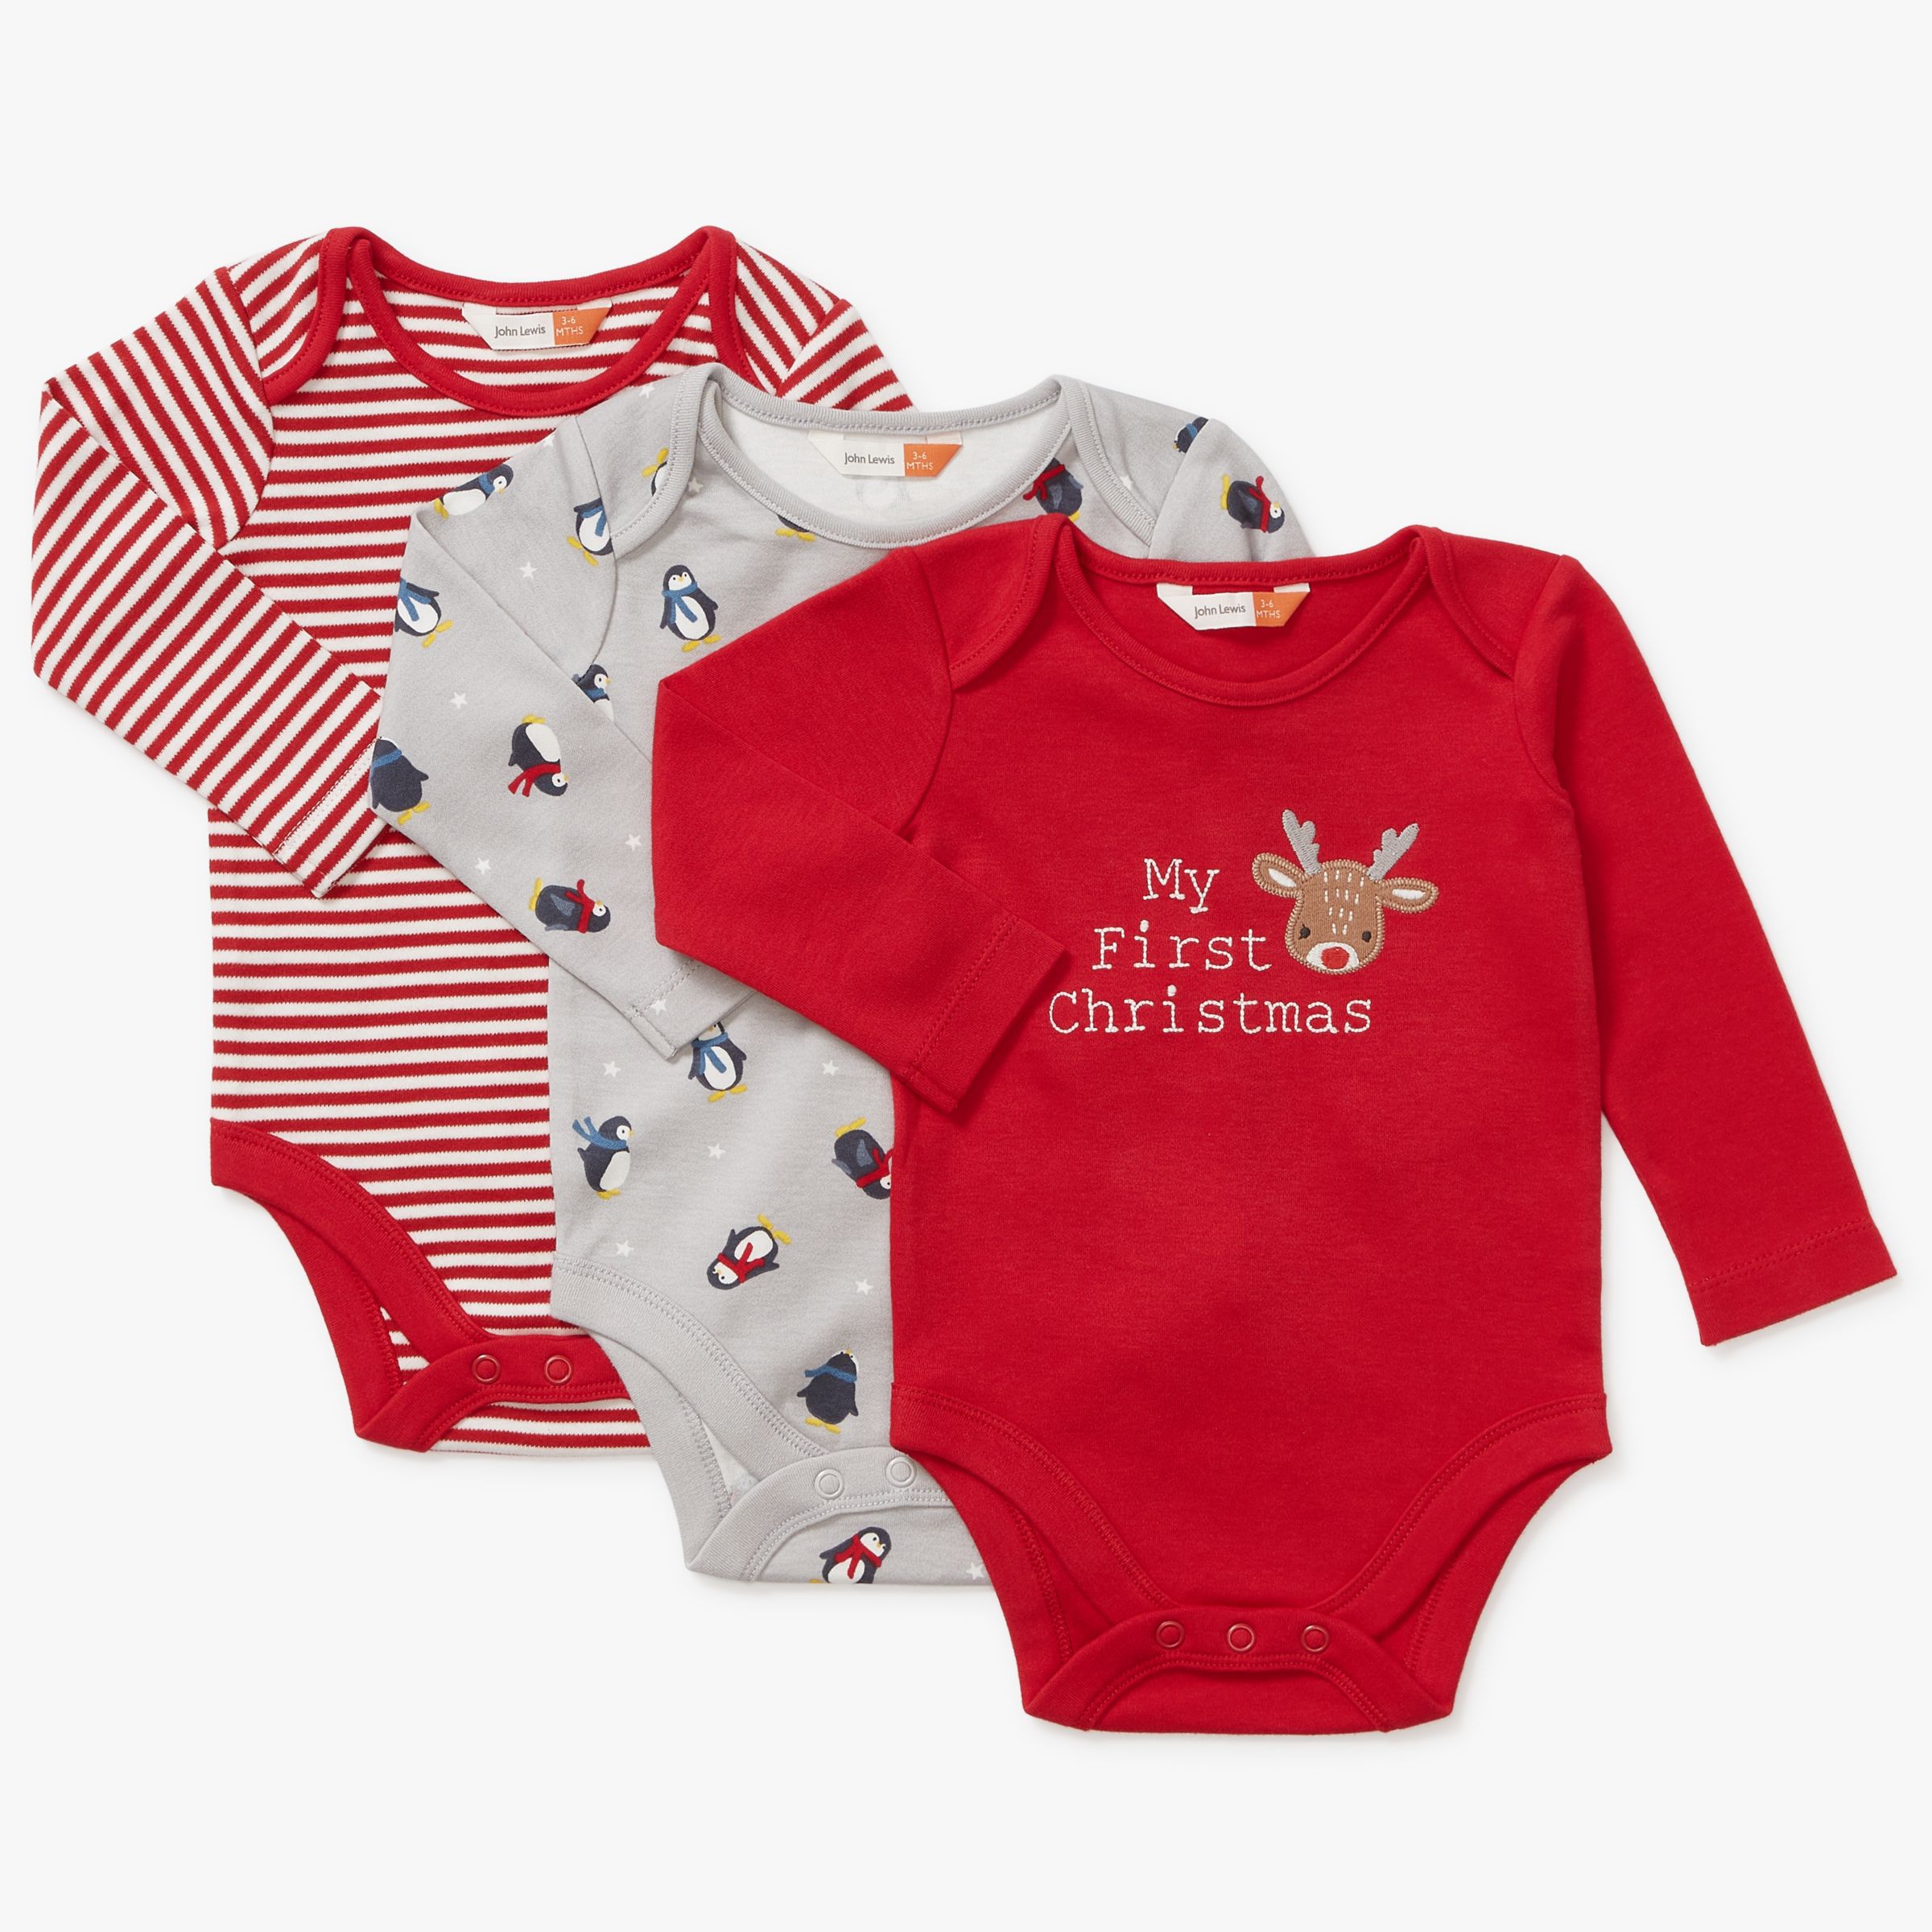 John Lewis Baby My 1st Christmas Bodysuit, Pack of 3, Red